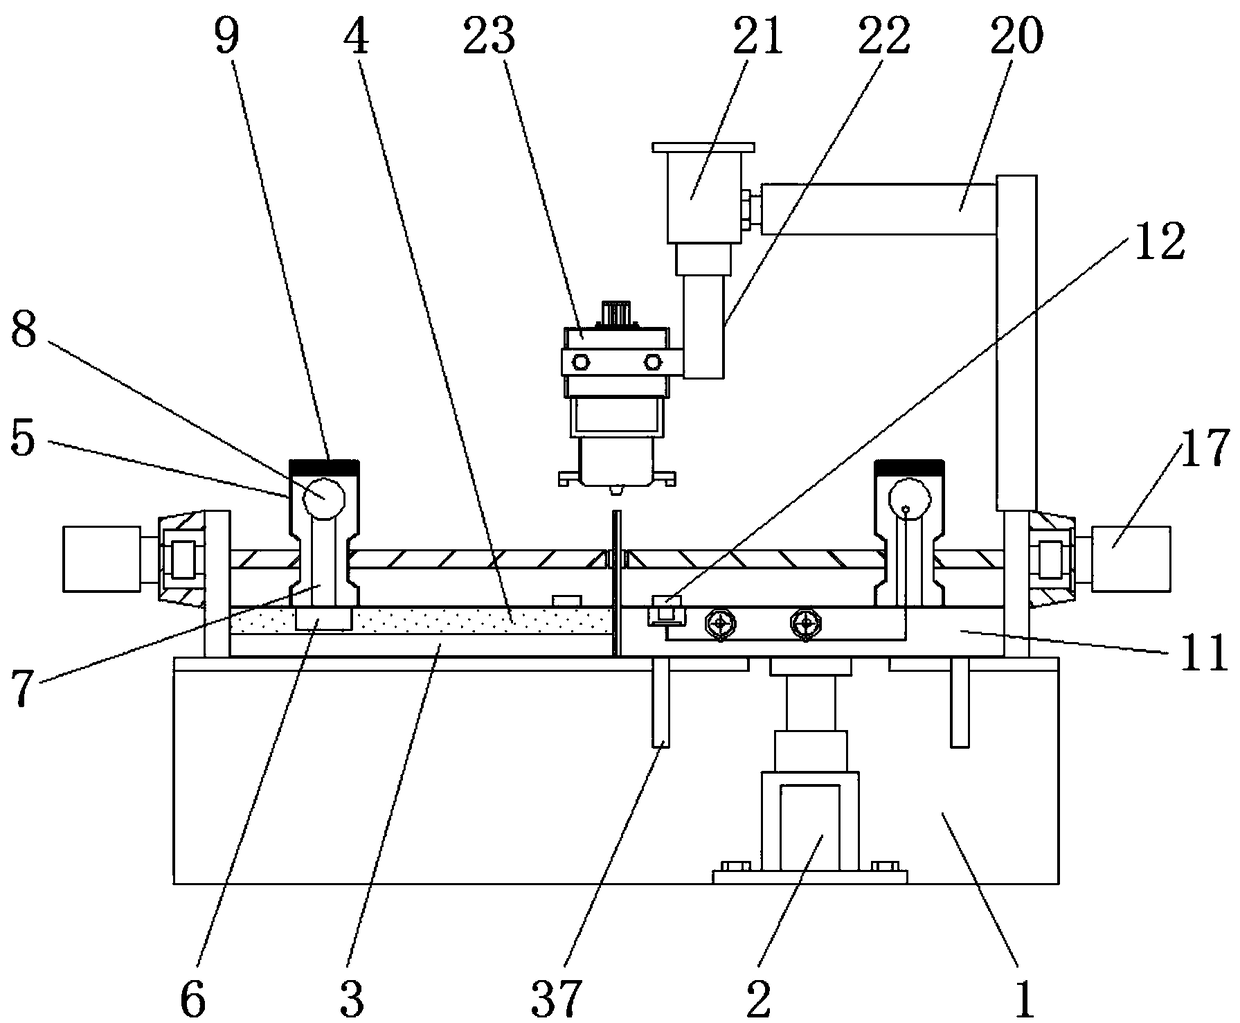 Ultrasonic-assisted friction stir welding device